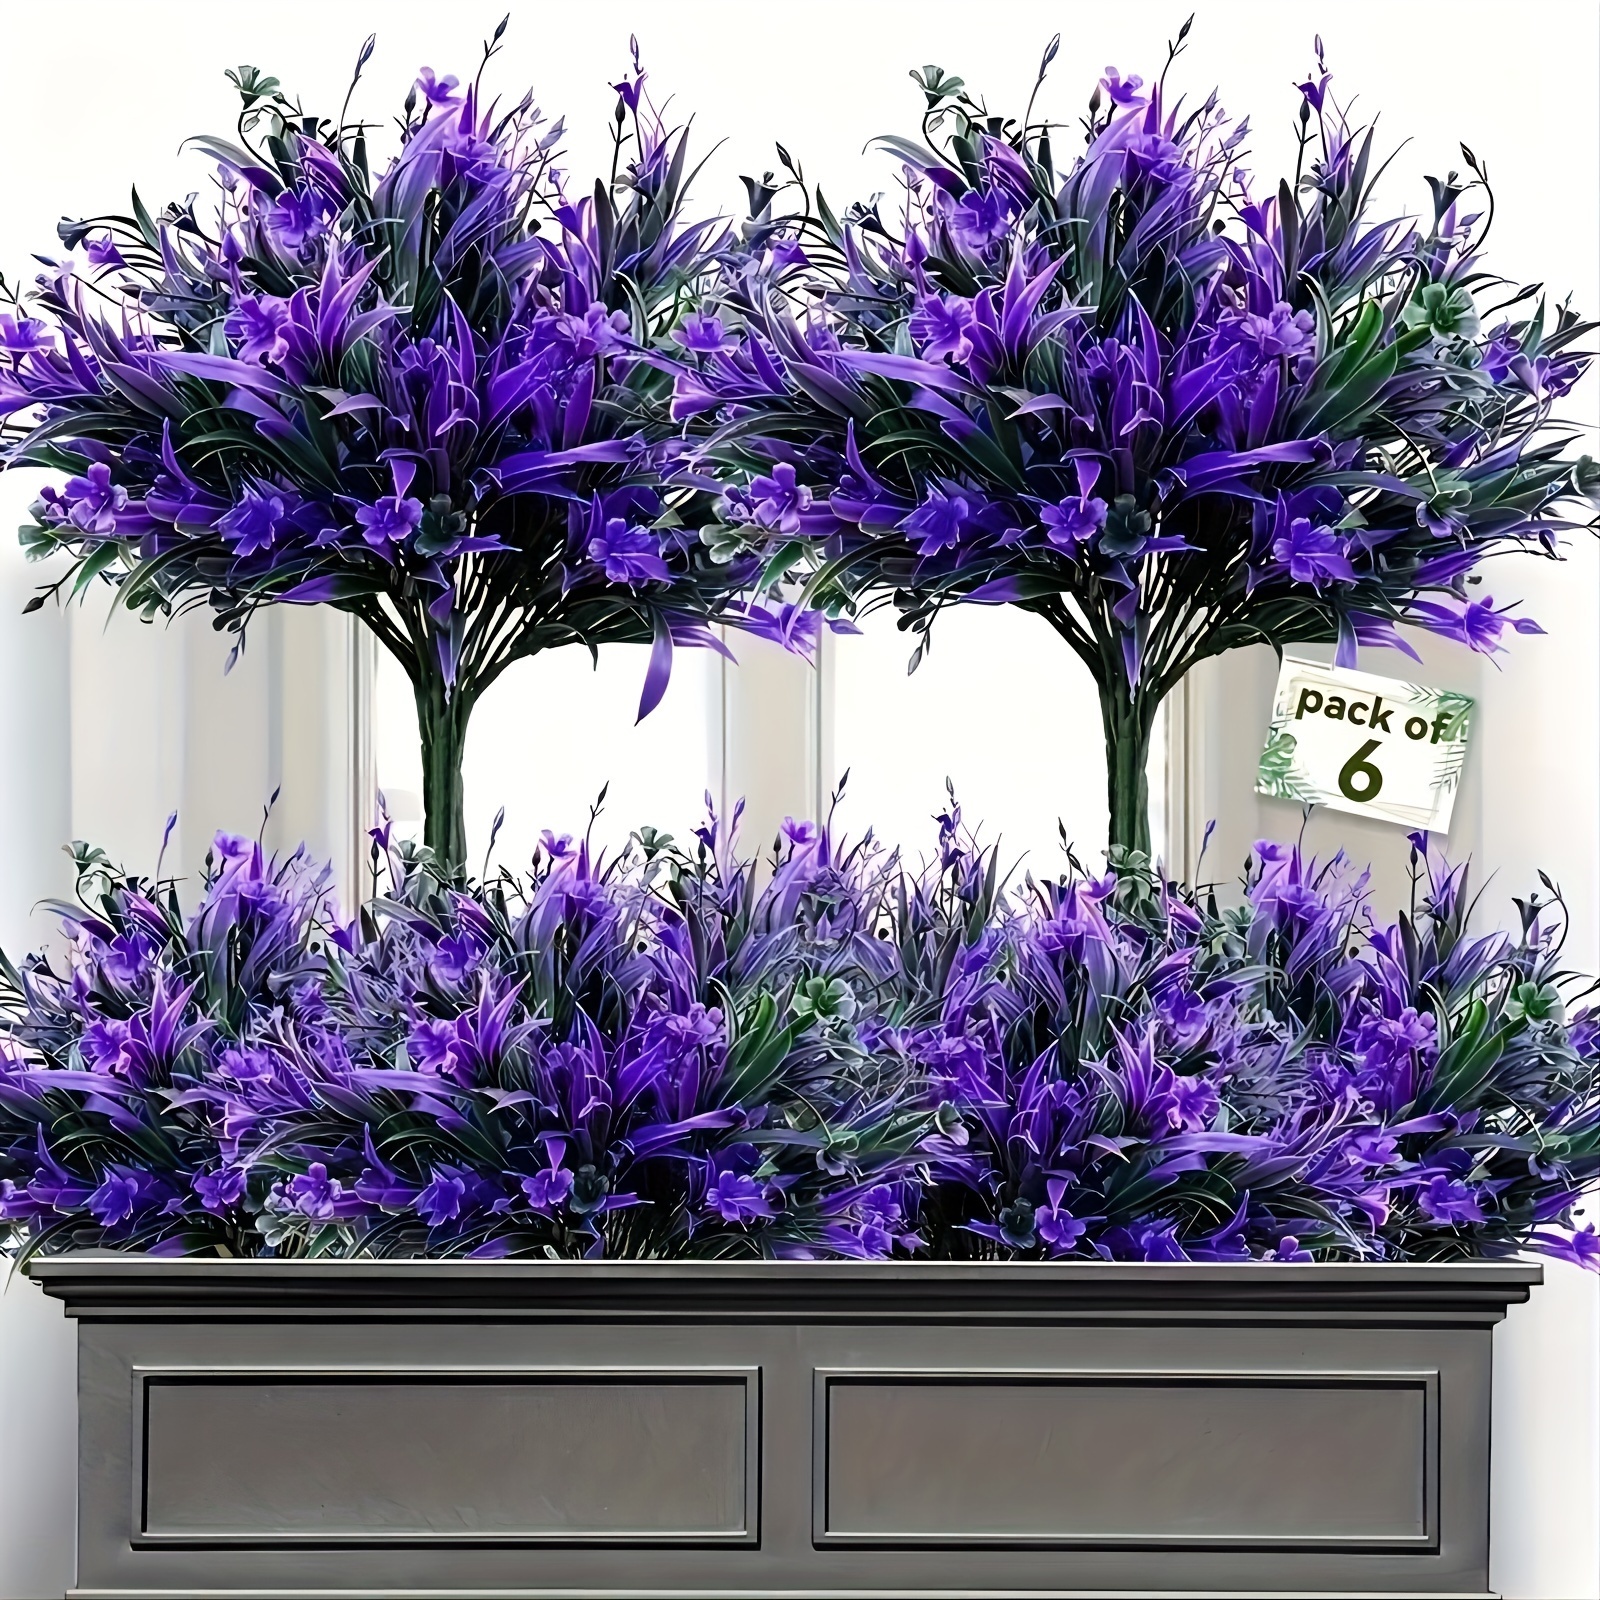 

6 Bundles Of Aubeinson's Artificial Purple Flowers: Uv Resistant, No Fade, Perfect For Outdoor Decorating - Suitable For , Windows, And Gardens